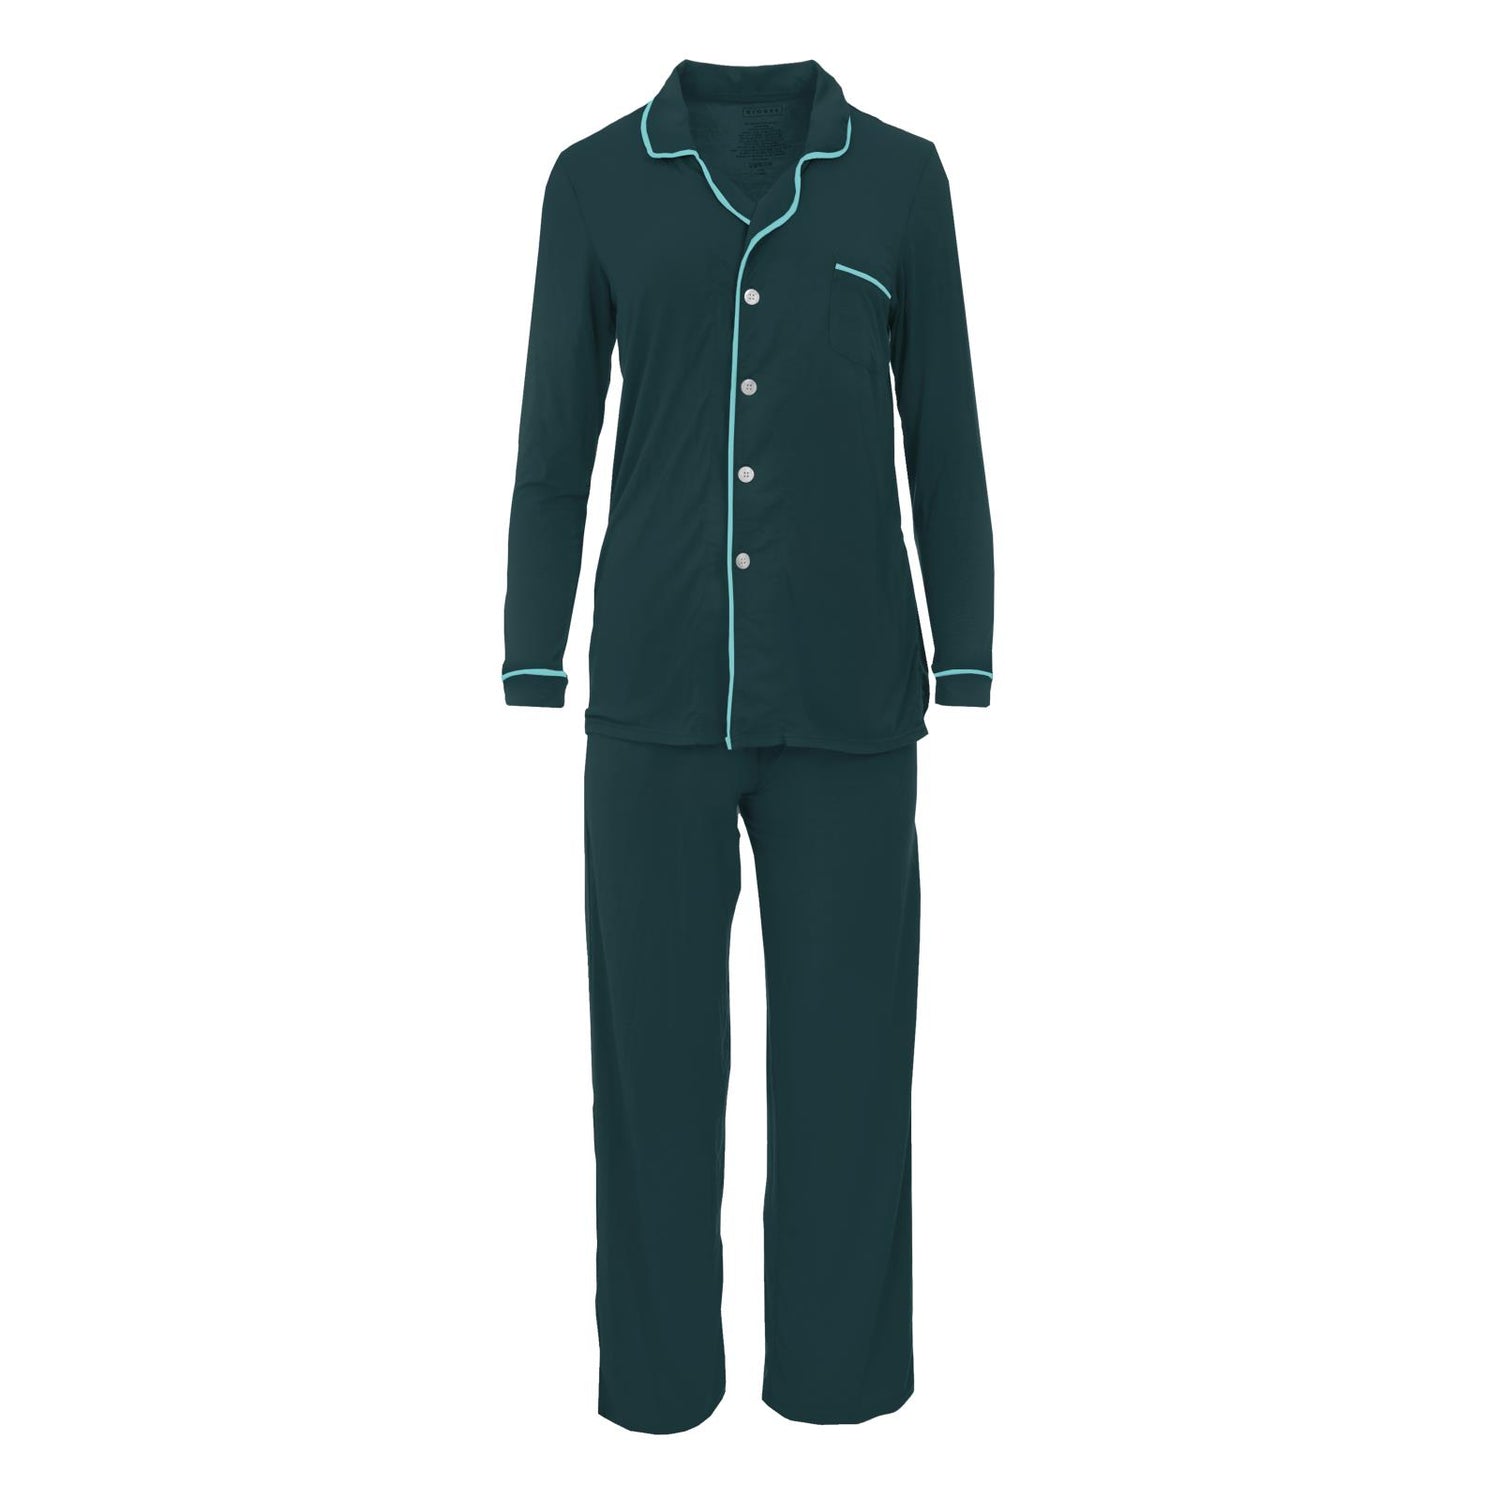 Women's Long Sleeved Collared Pajama Set in Pine with Iceberg